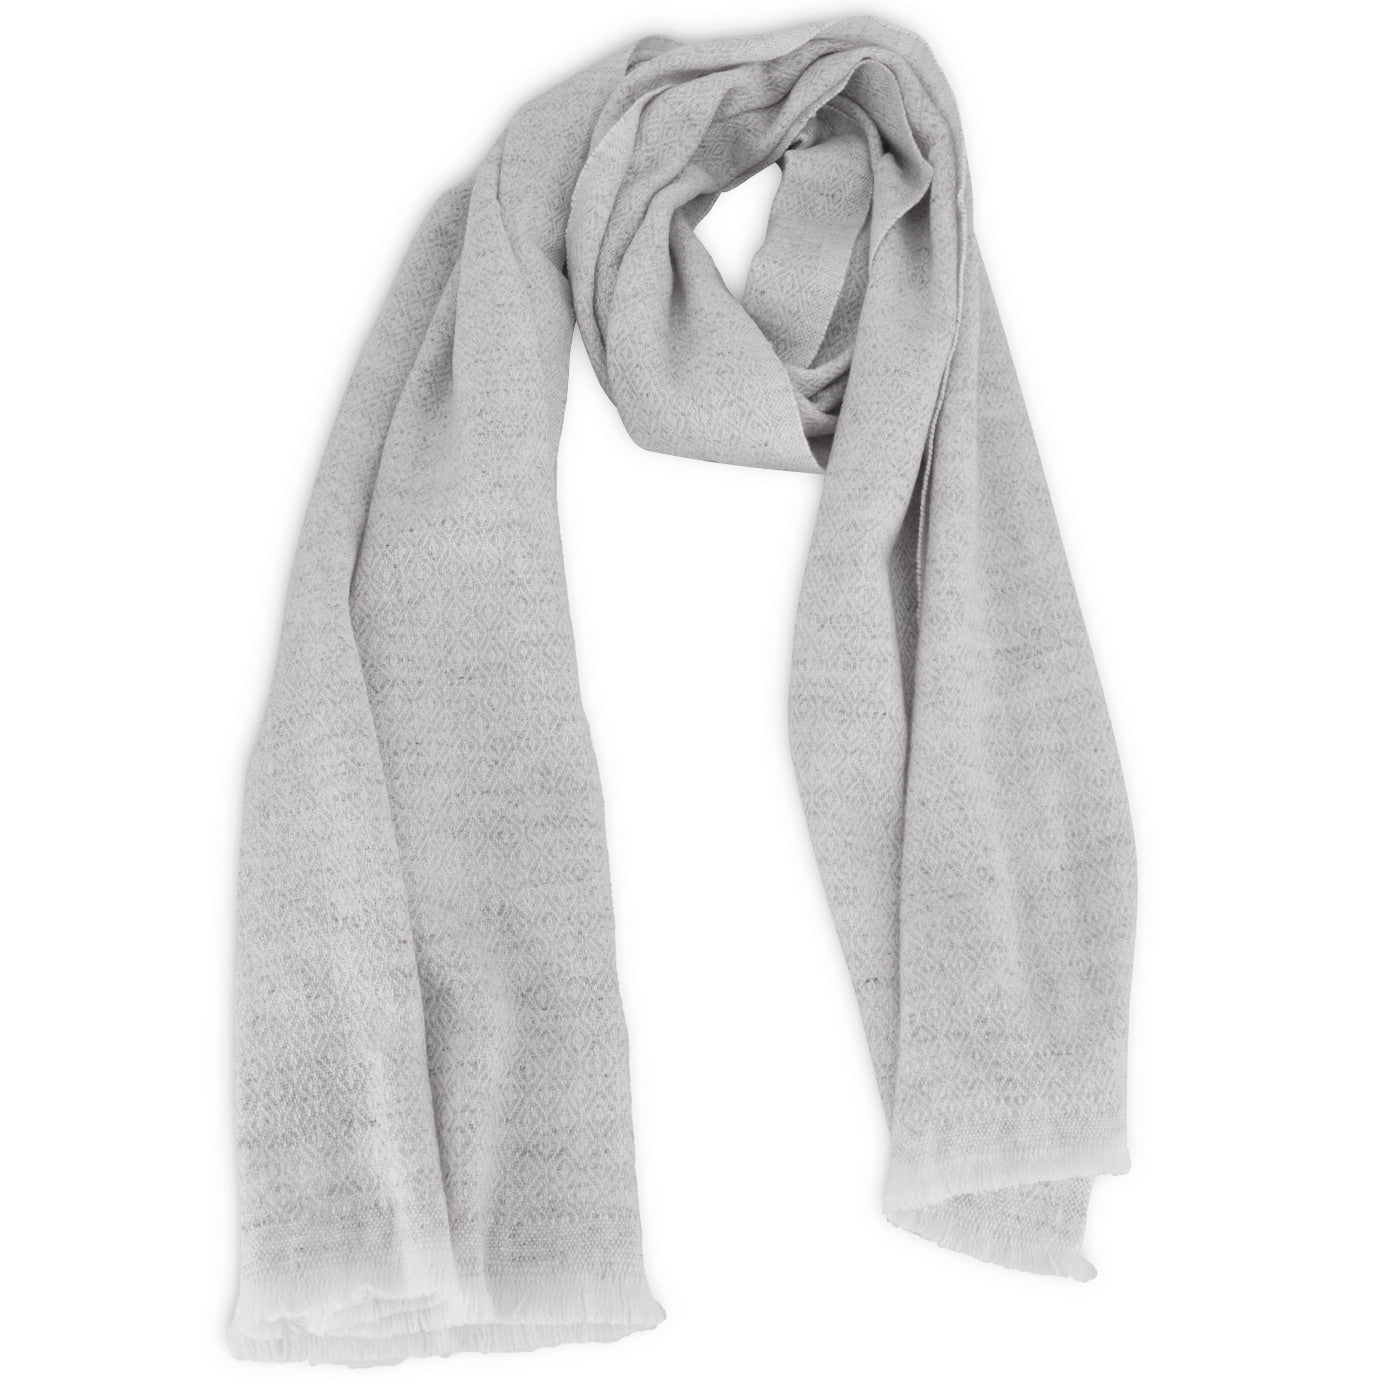 Men's silver grey cashmere and wool scarf - Diamond pattern